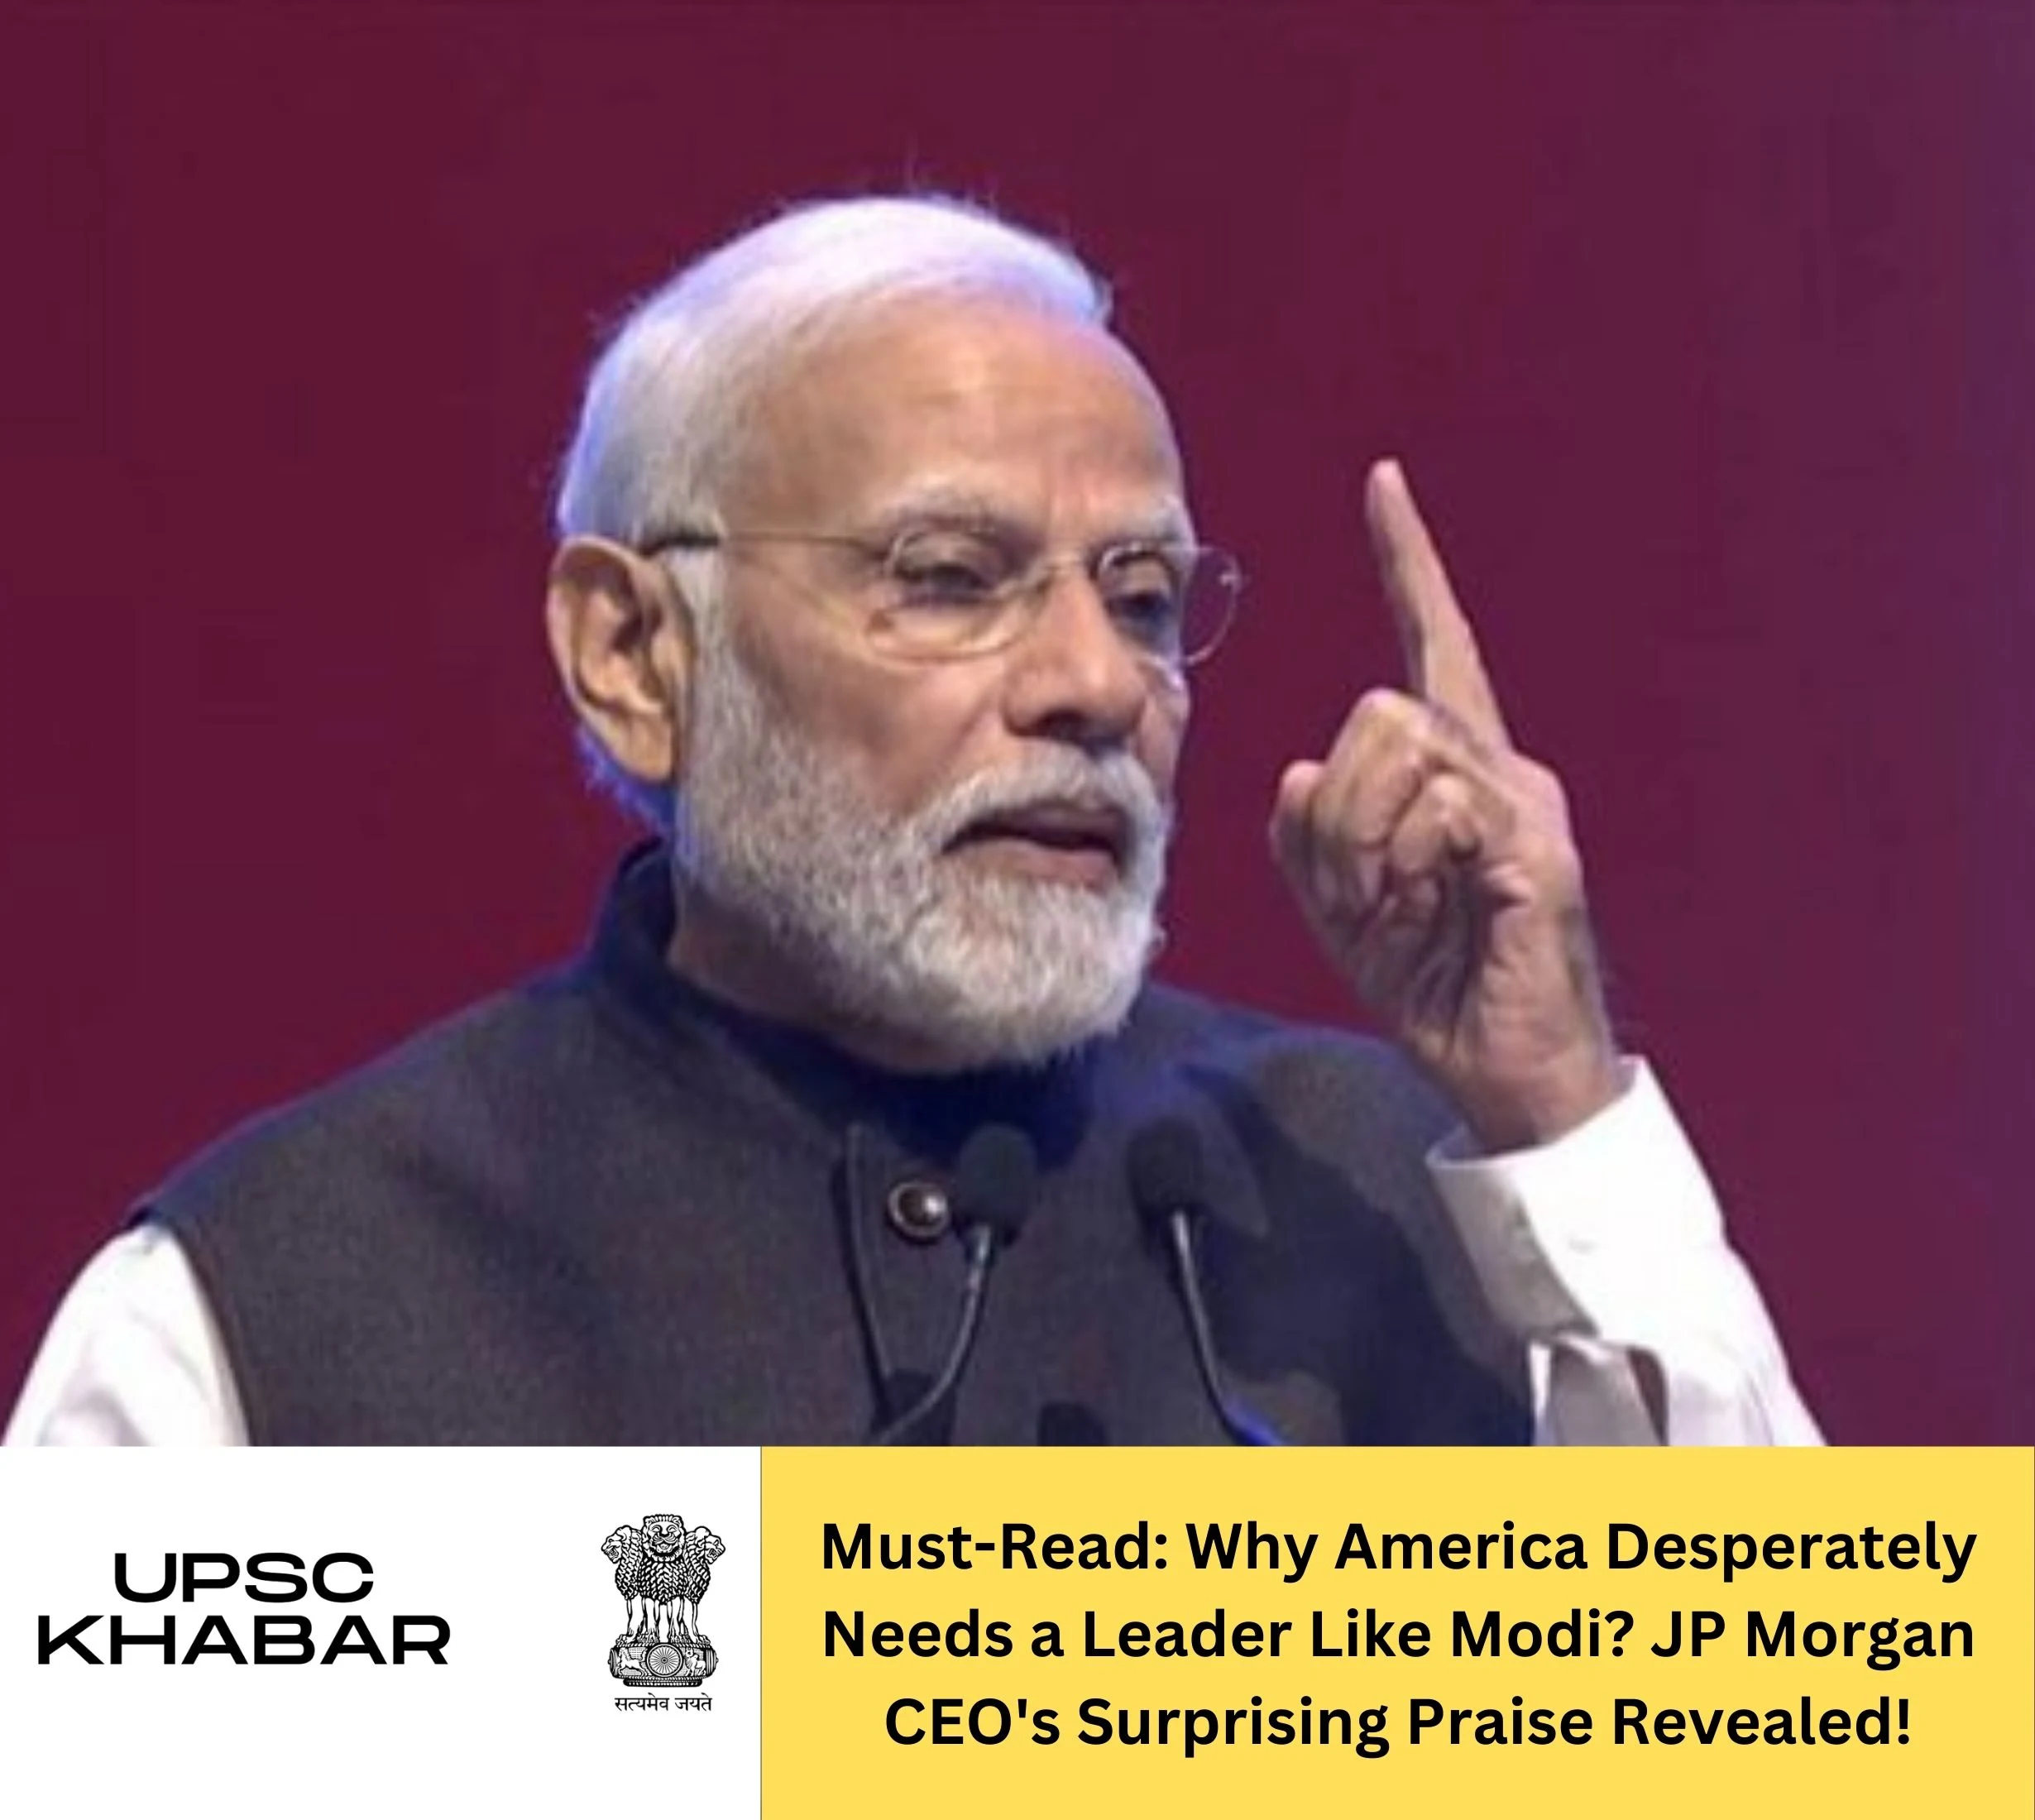 Must-Read: Why America Desperately Needs a Leader Like Modi? JP Morgan CEO's Surprising Praise Revealed!